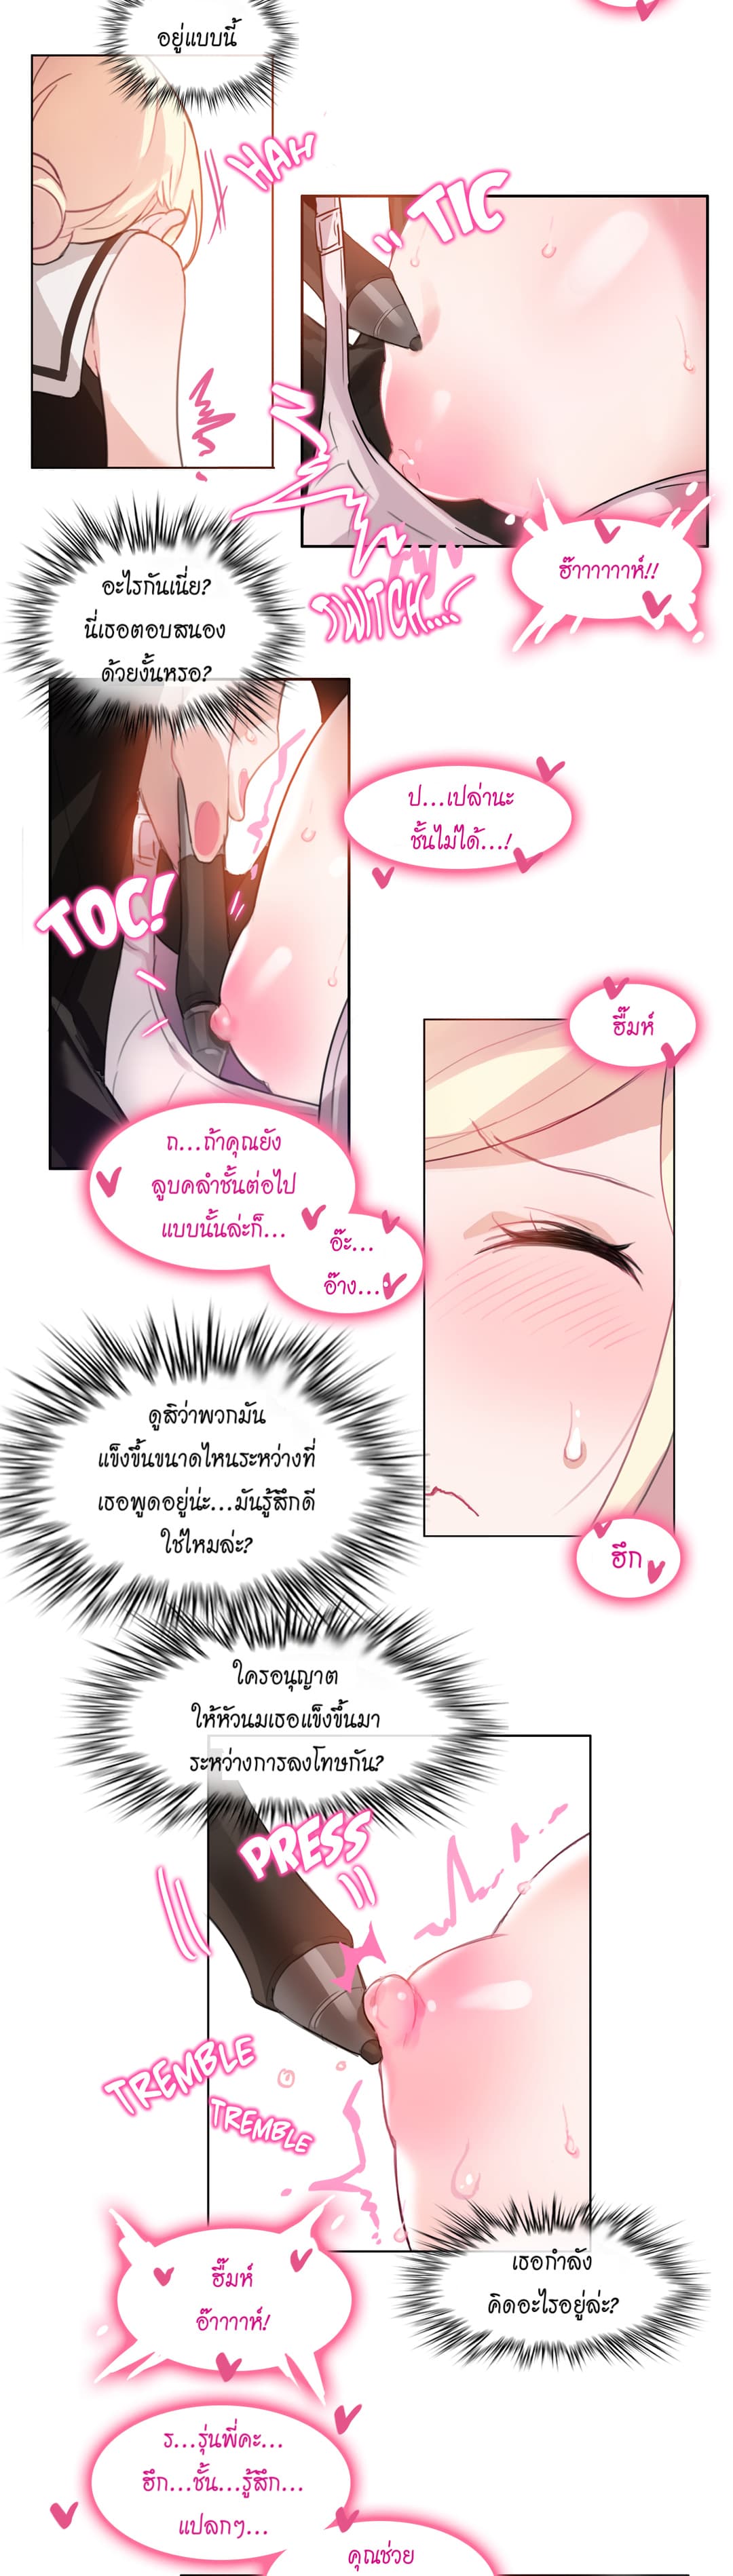 A Pervert’s Daily Life 13 (10)